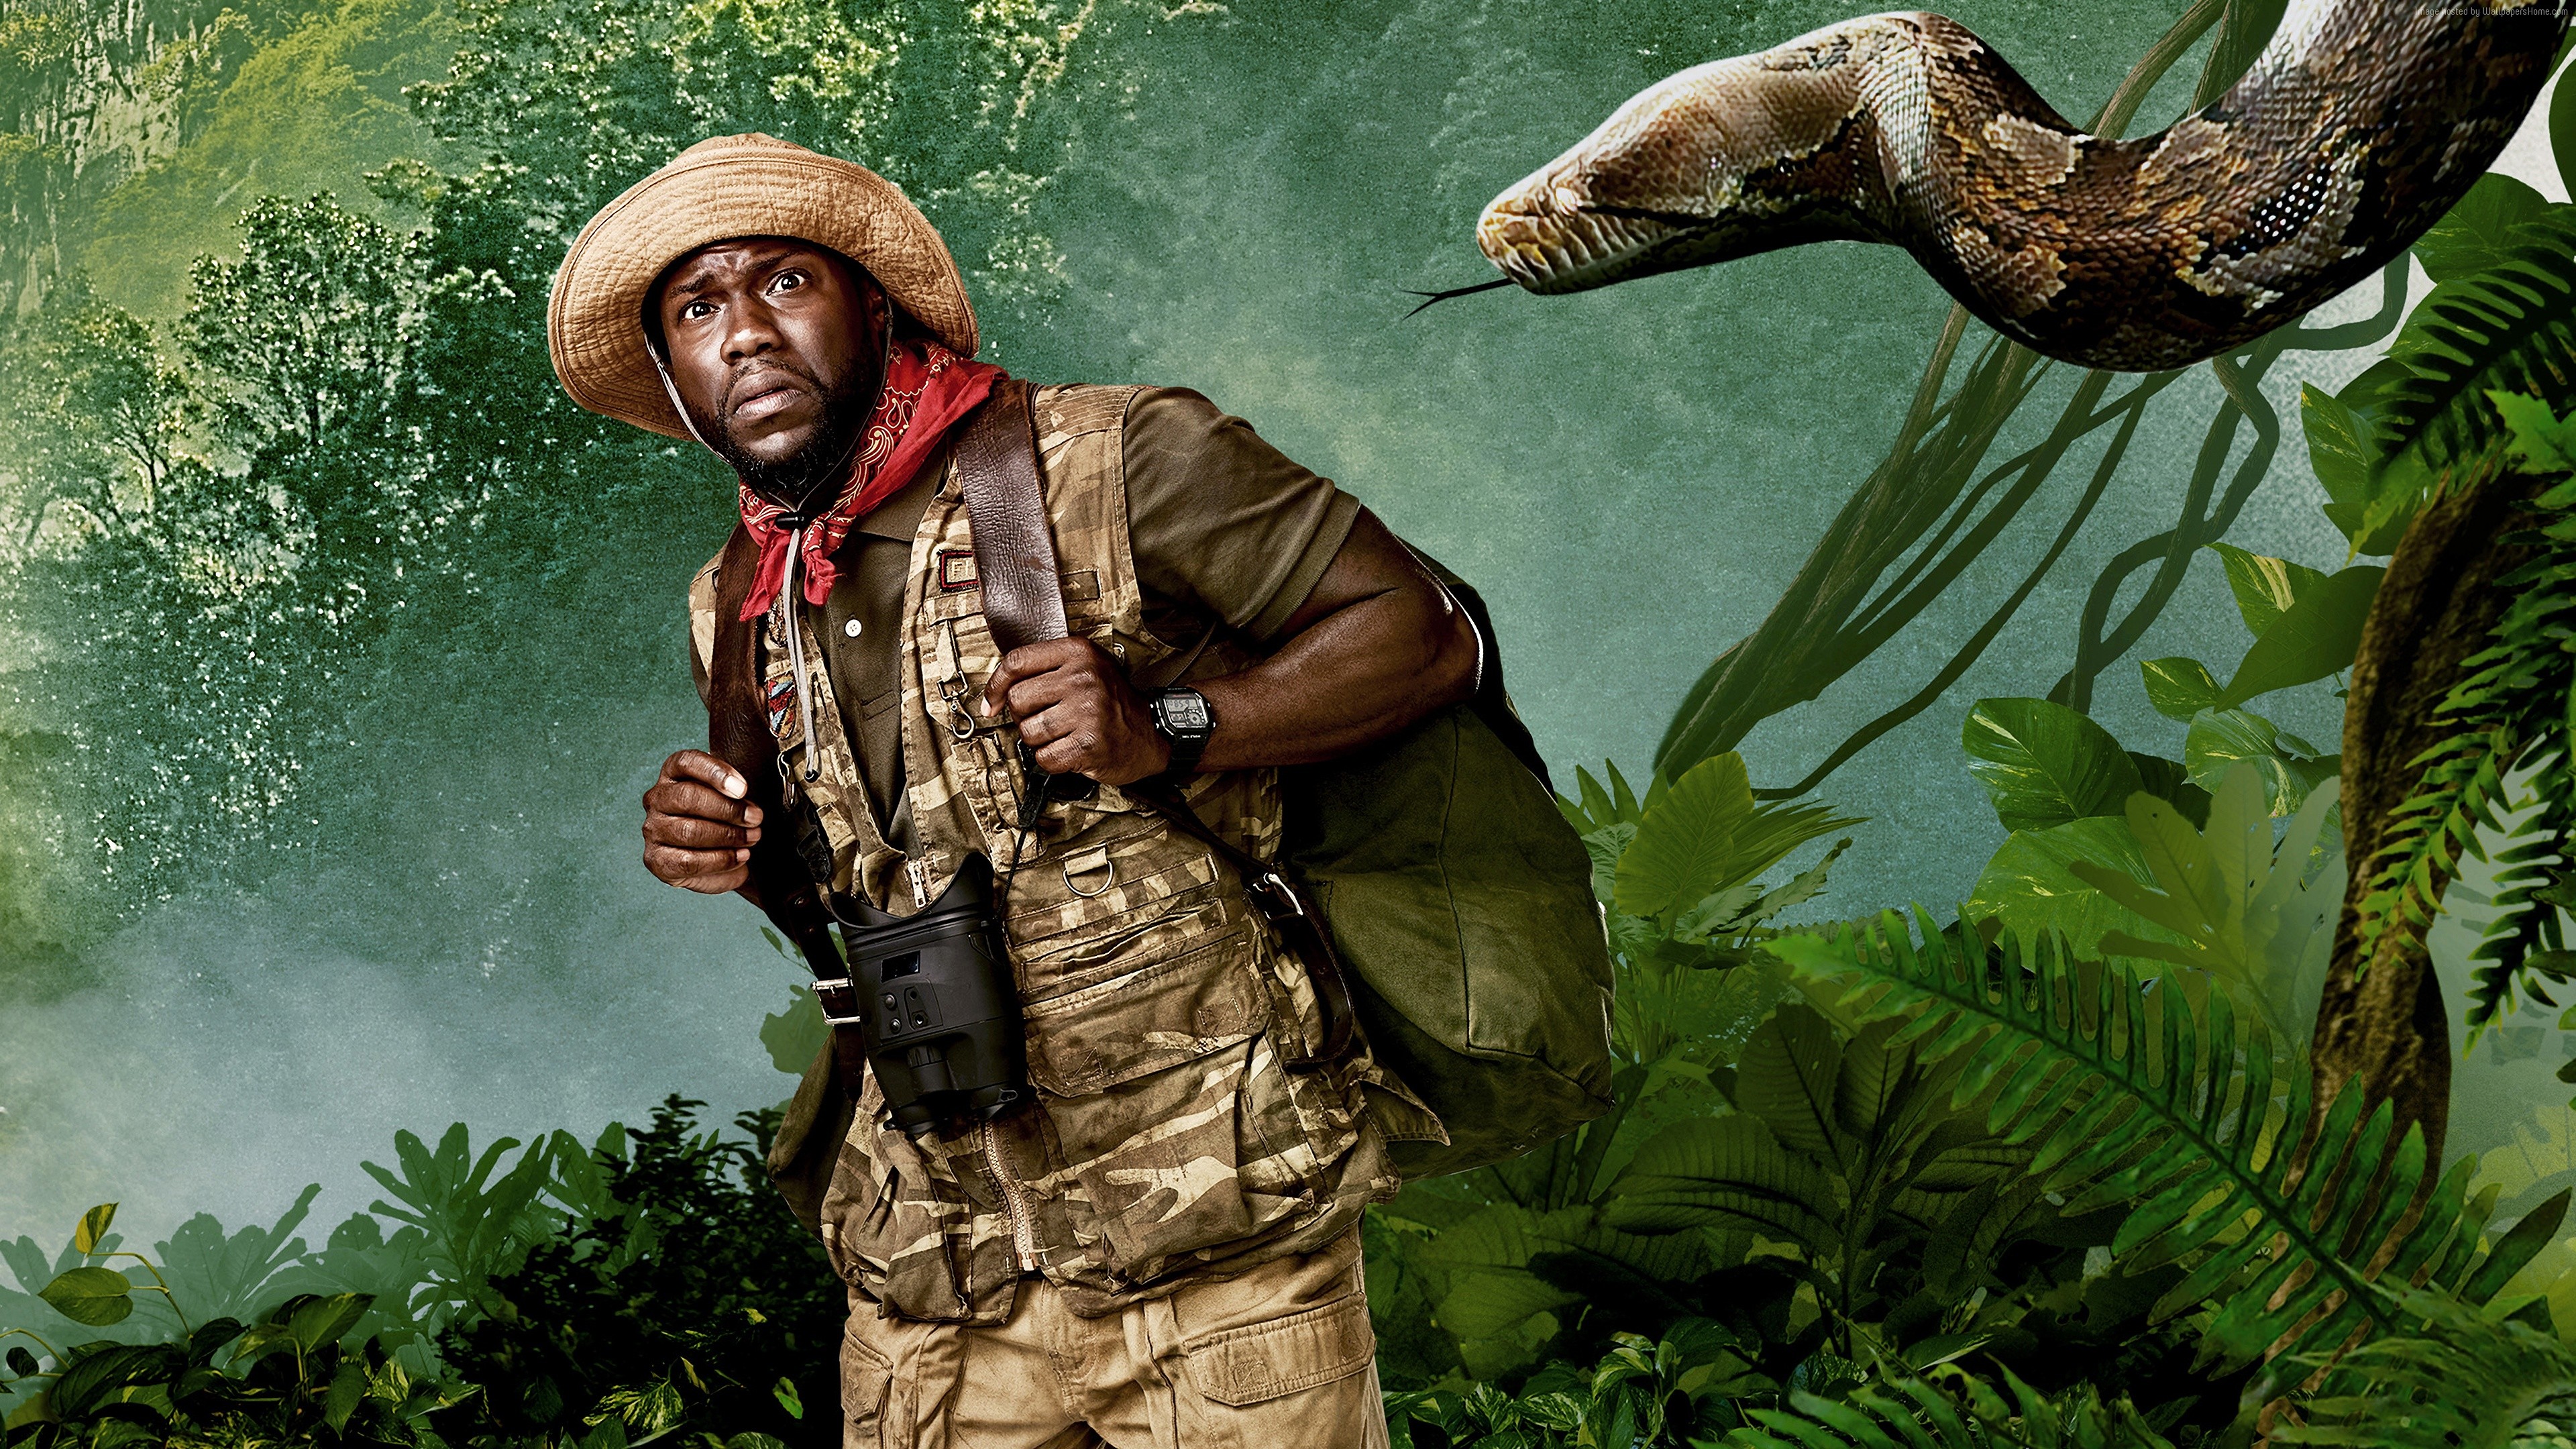 instal the new version for windows Jumanji: Welcome to the Jungle